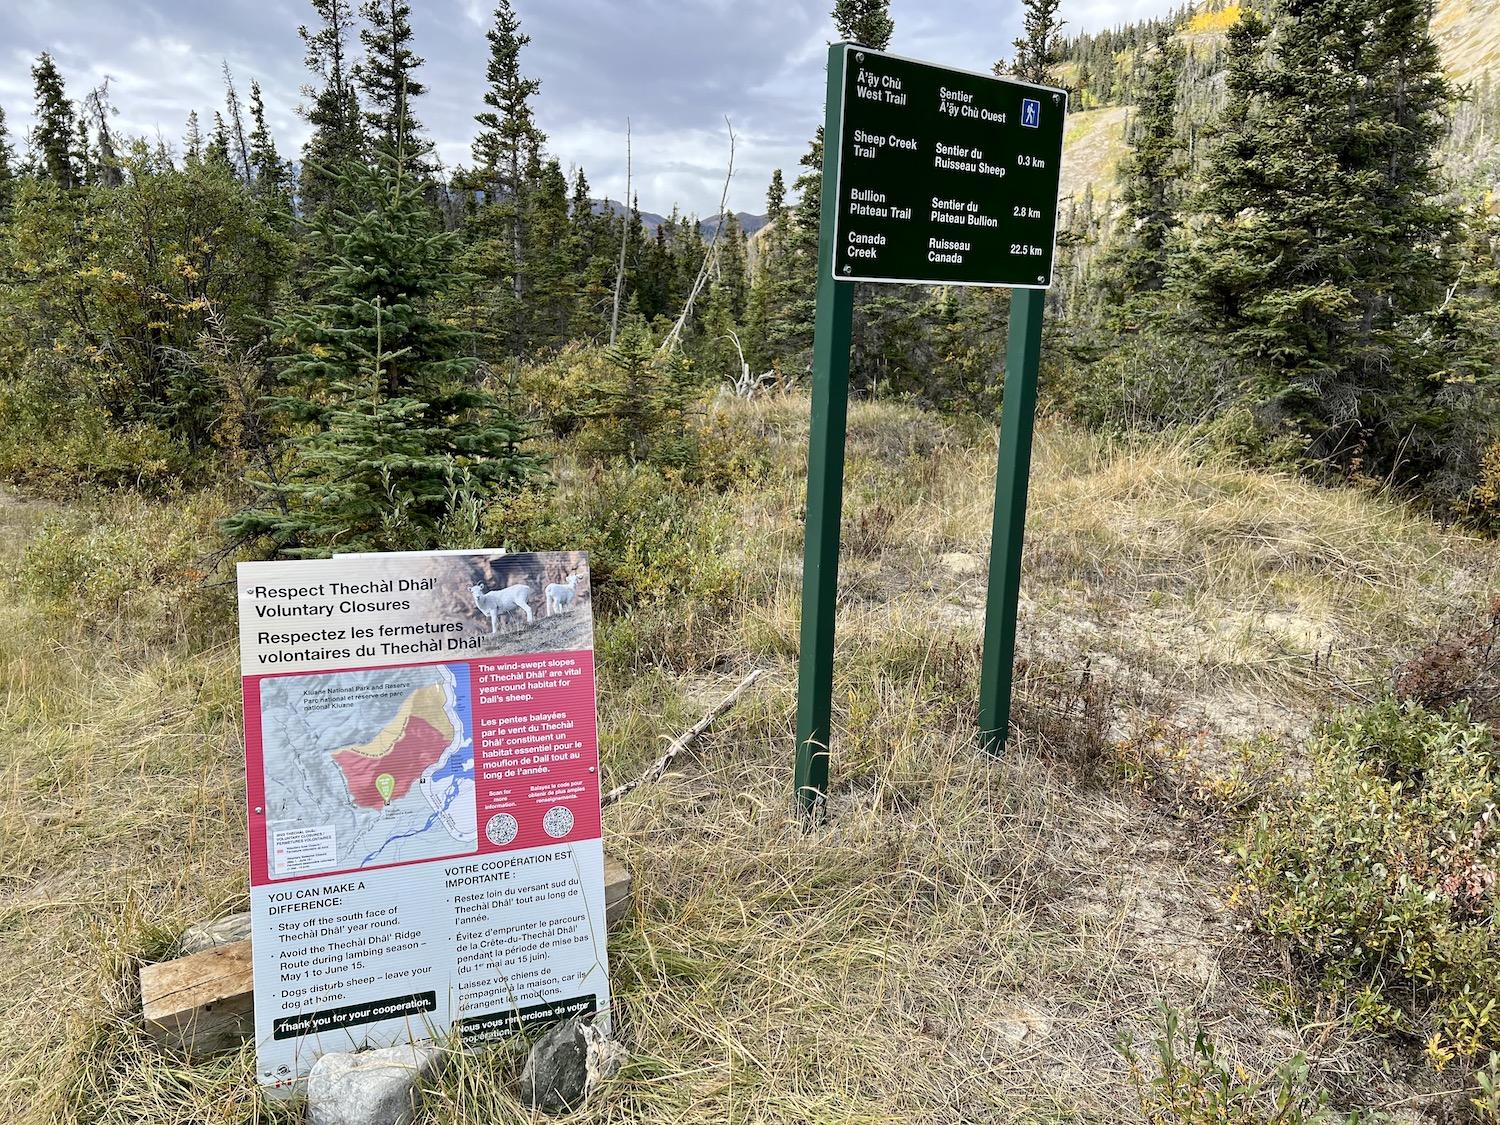 Signage just before the Sheep Creek trailhead tells hikers about Dall's sheep.